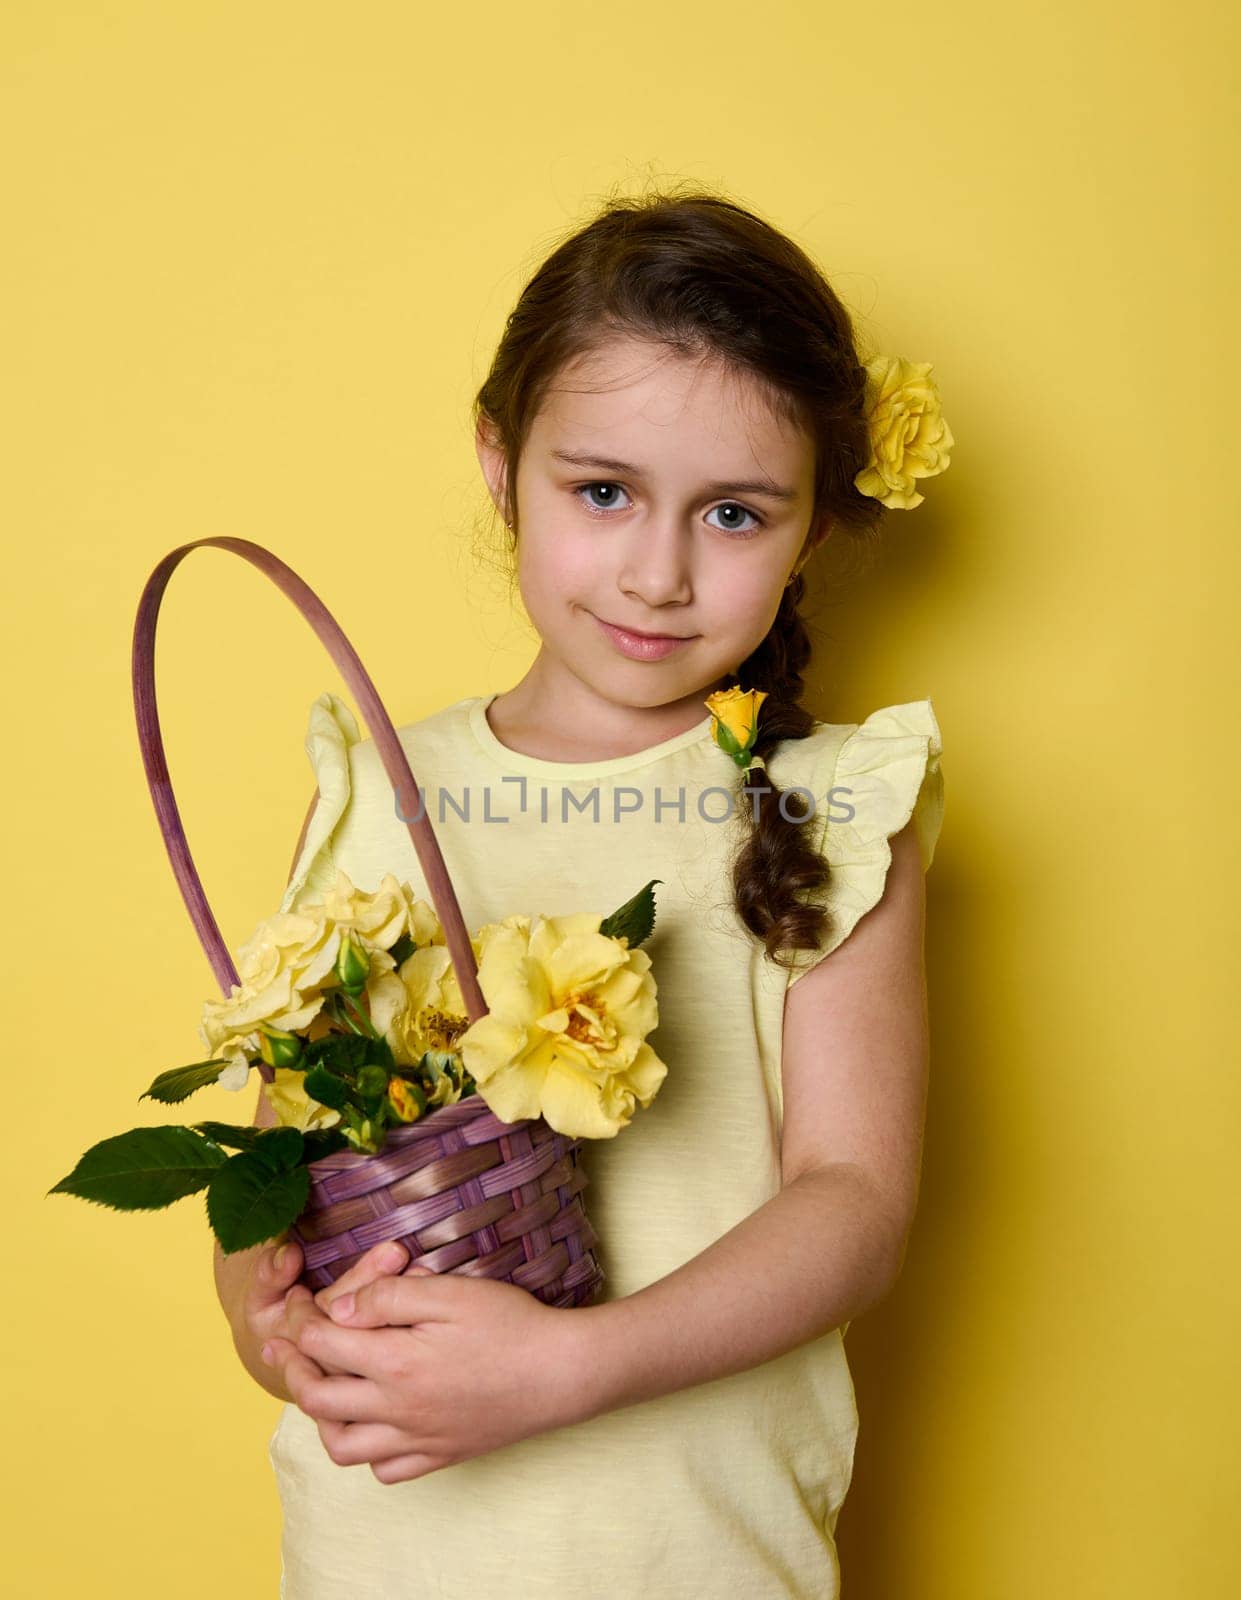 Caucasian little girl in yellow elegant wear and flowers in hair, holding bouquet of roses in basket, smiling at camera by artgf